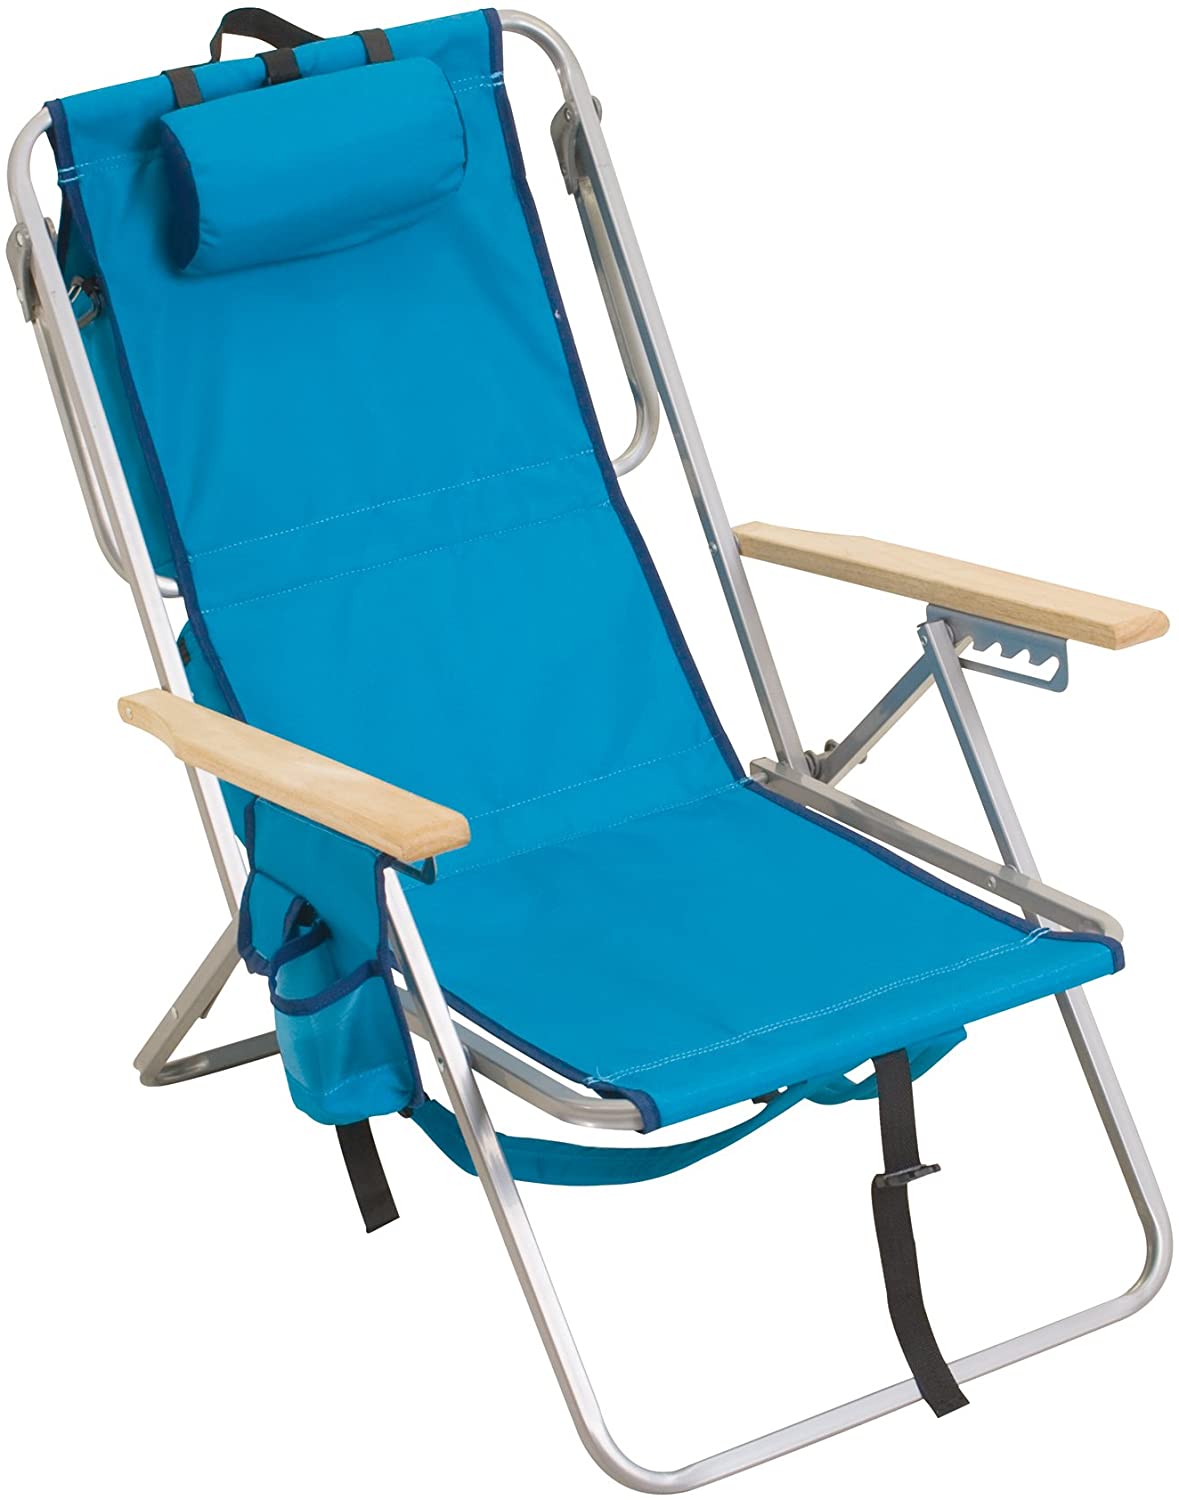 Simple Best Backpack Beach Chair 2017 for Large Space